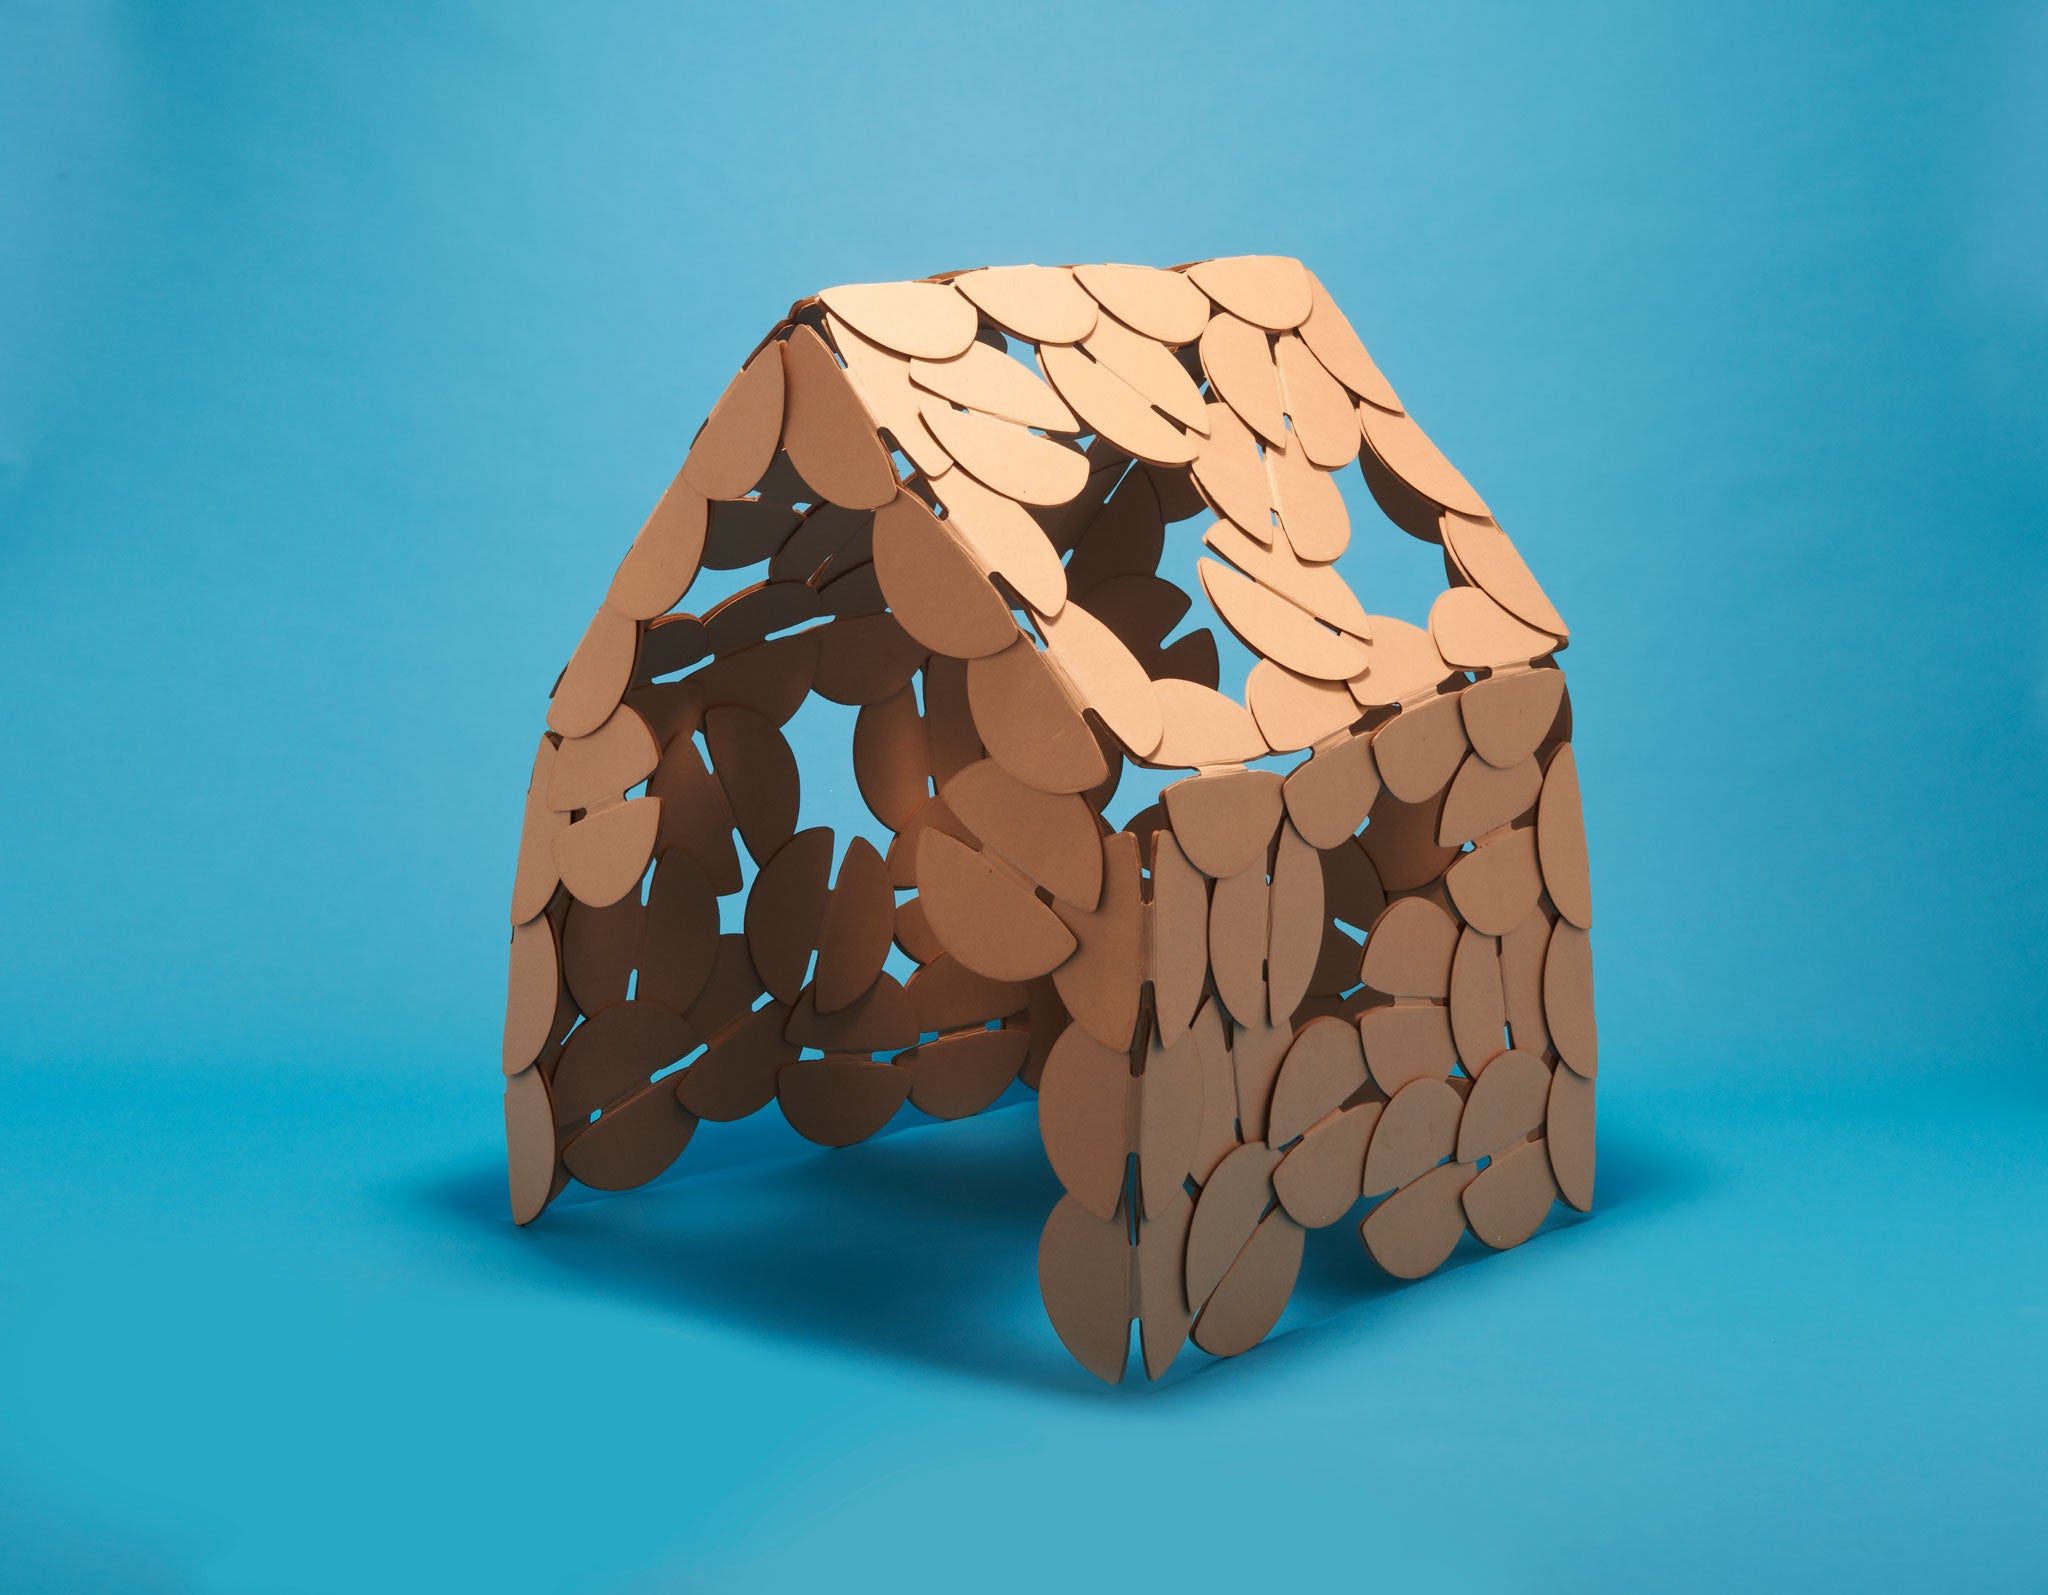 Torsten Sherwood's Noook is a simple construction toy for creating mini-architecture